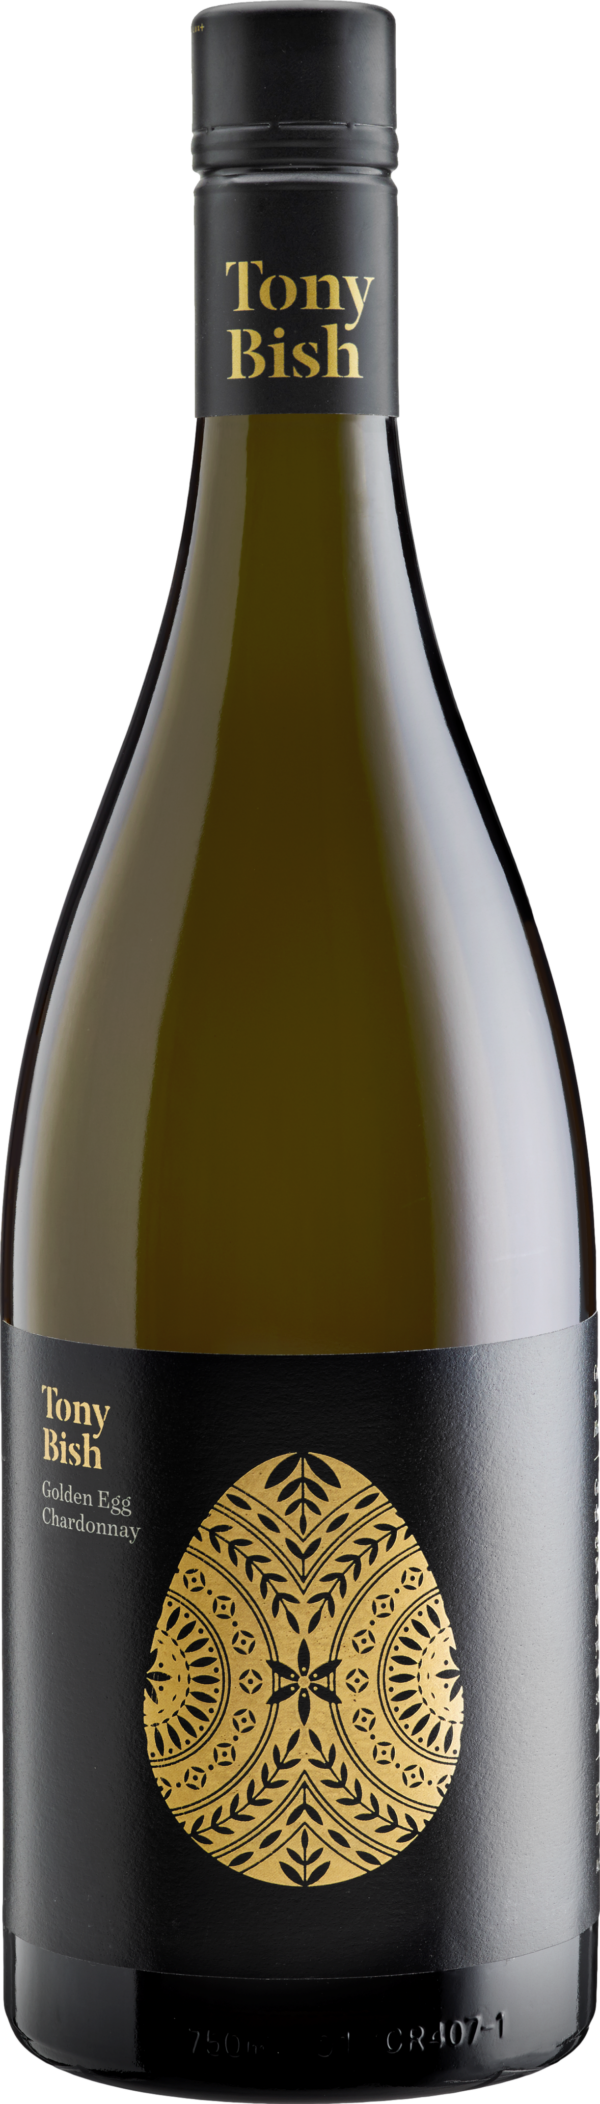 Product image of Tony Bish Golden Egg Chardonnay 2022 from 8wines